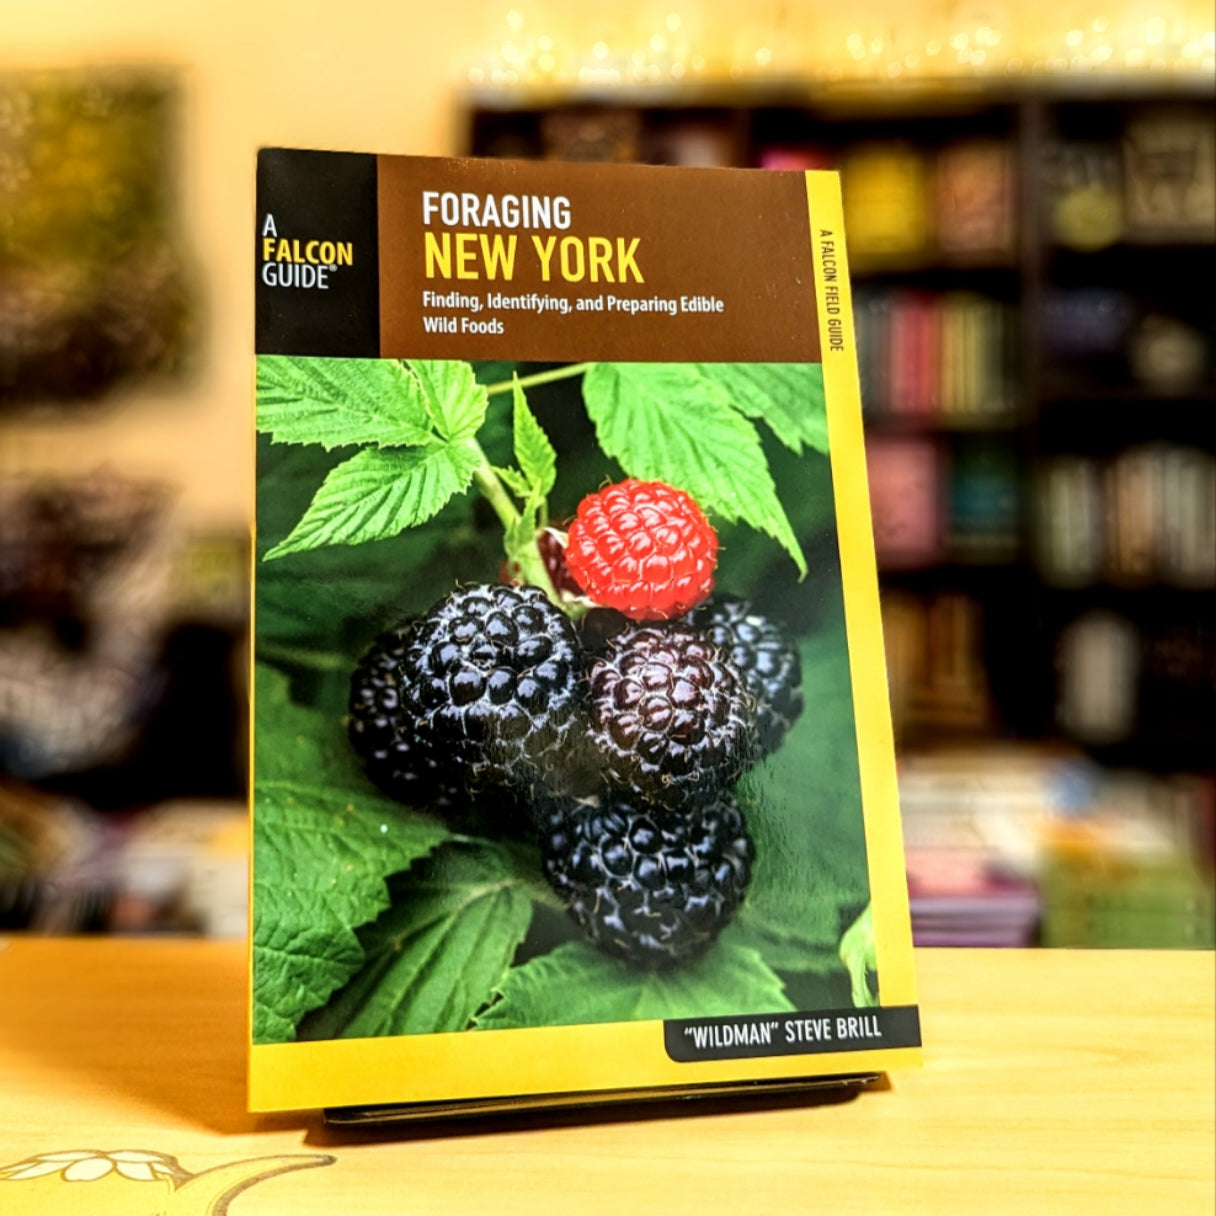 Foraging New York: Finding, Identifying, and Preparing Edible Wild Foods (Foraging Series)